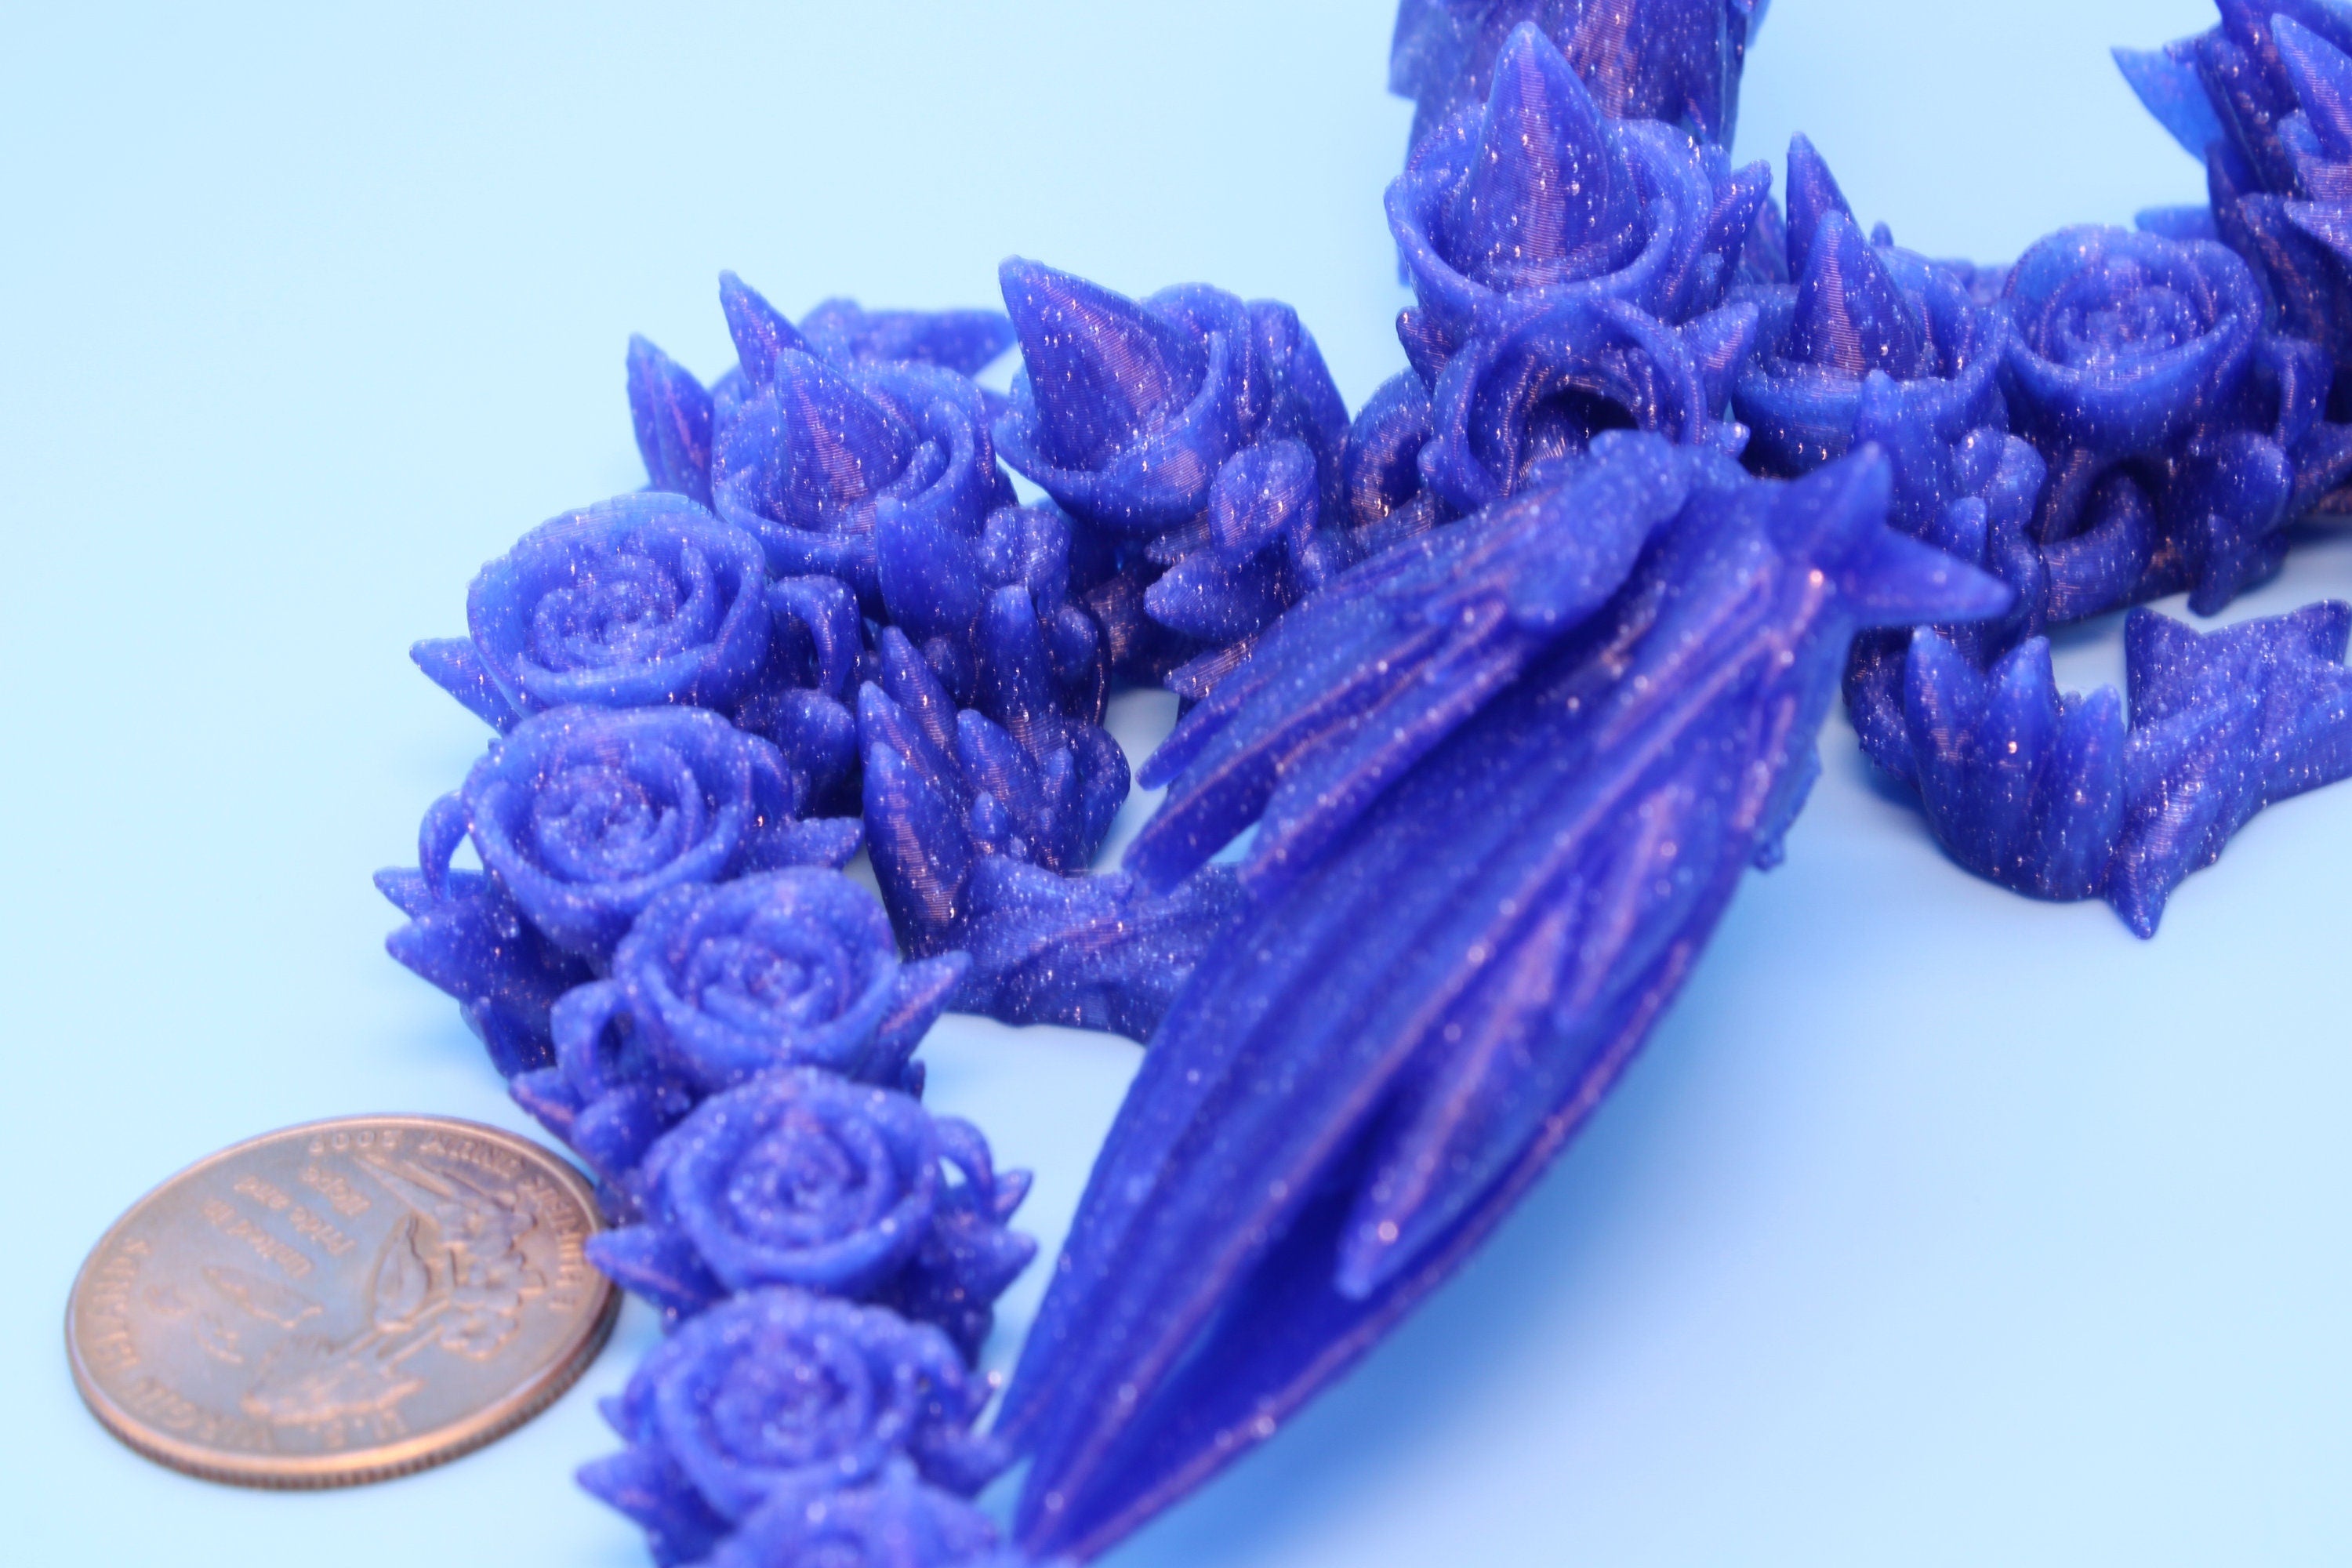 Baby Rose Wing Dragon | Blue | 3D Printed | Fidget | Flexi Toy 8.5 in. | Stress Relief Gift